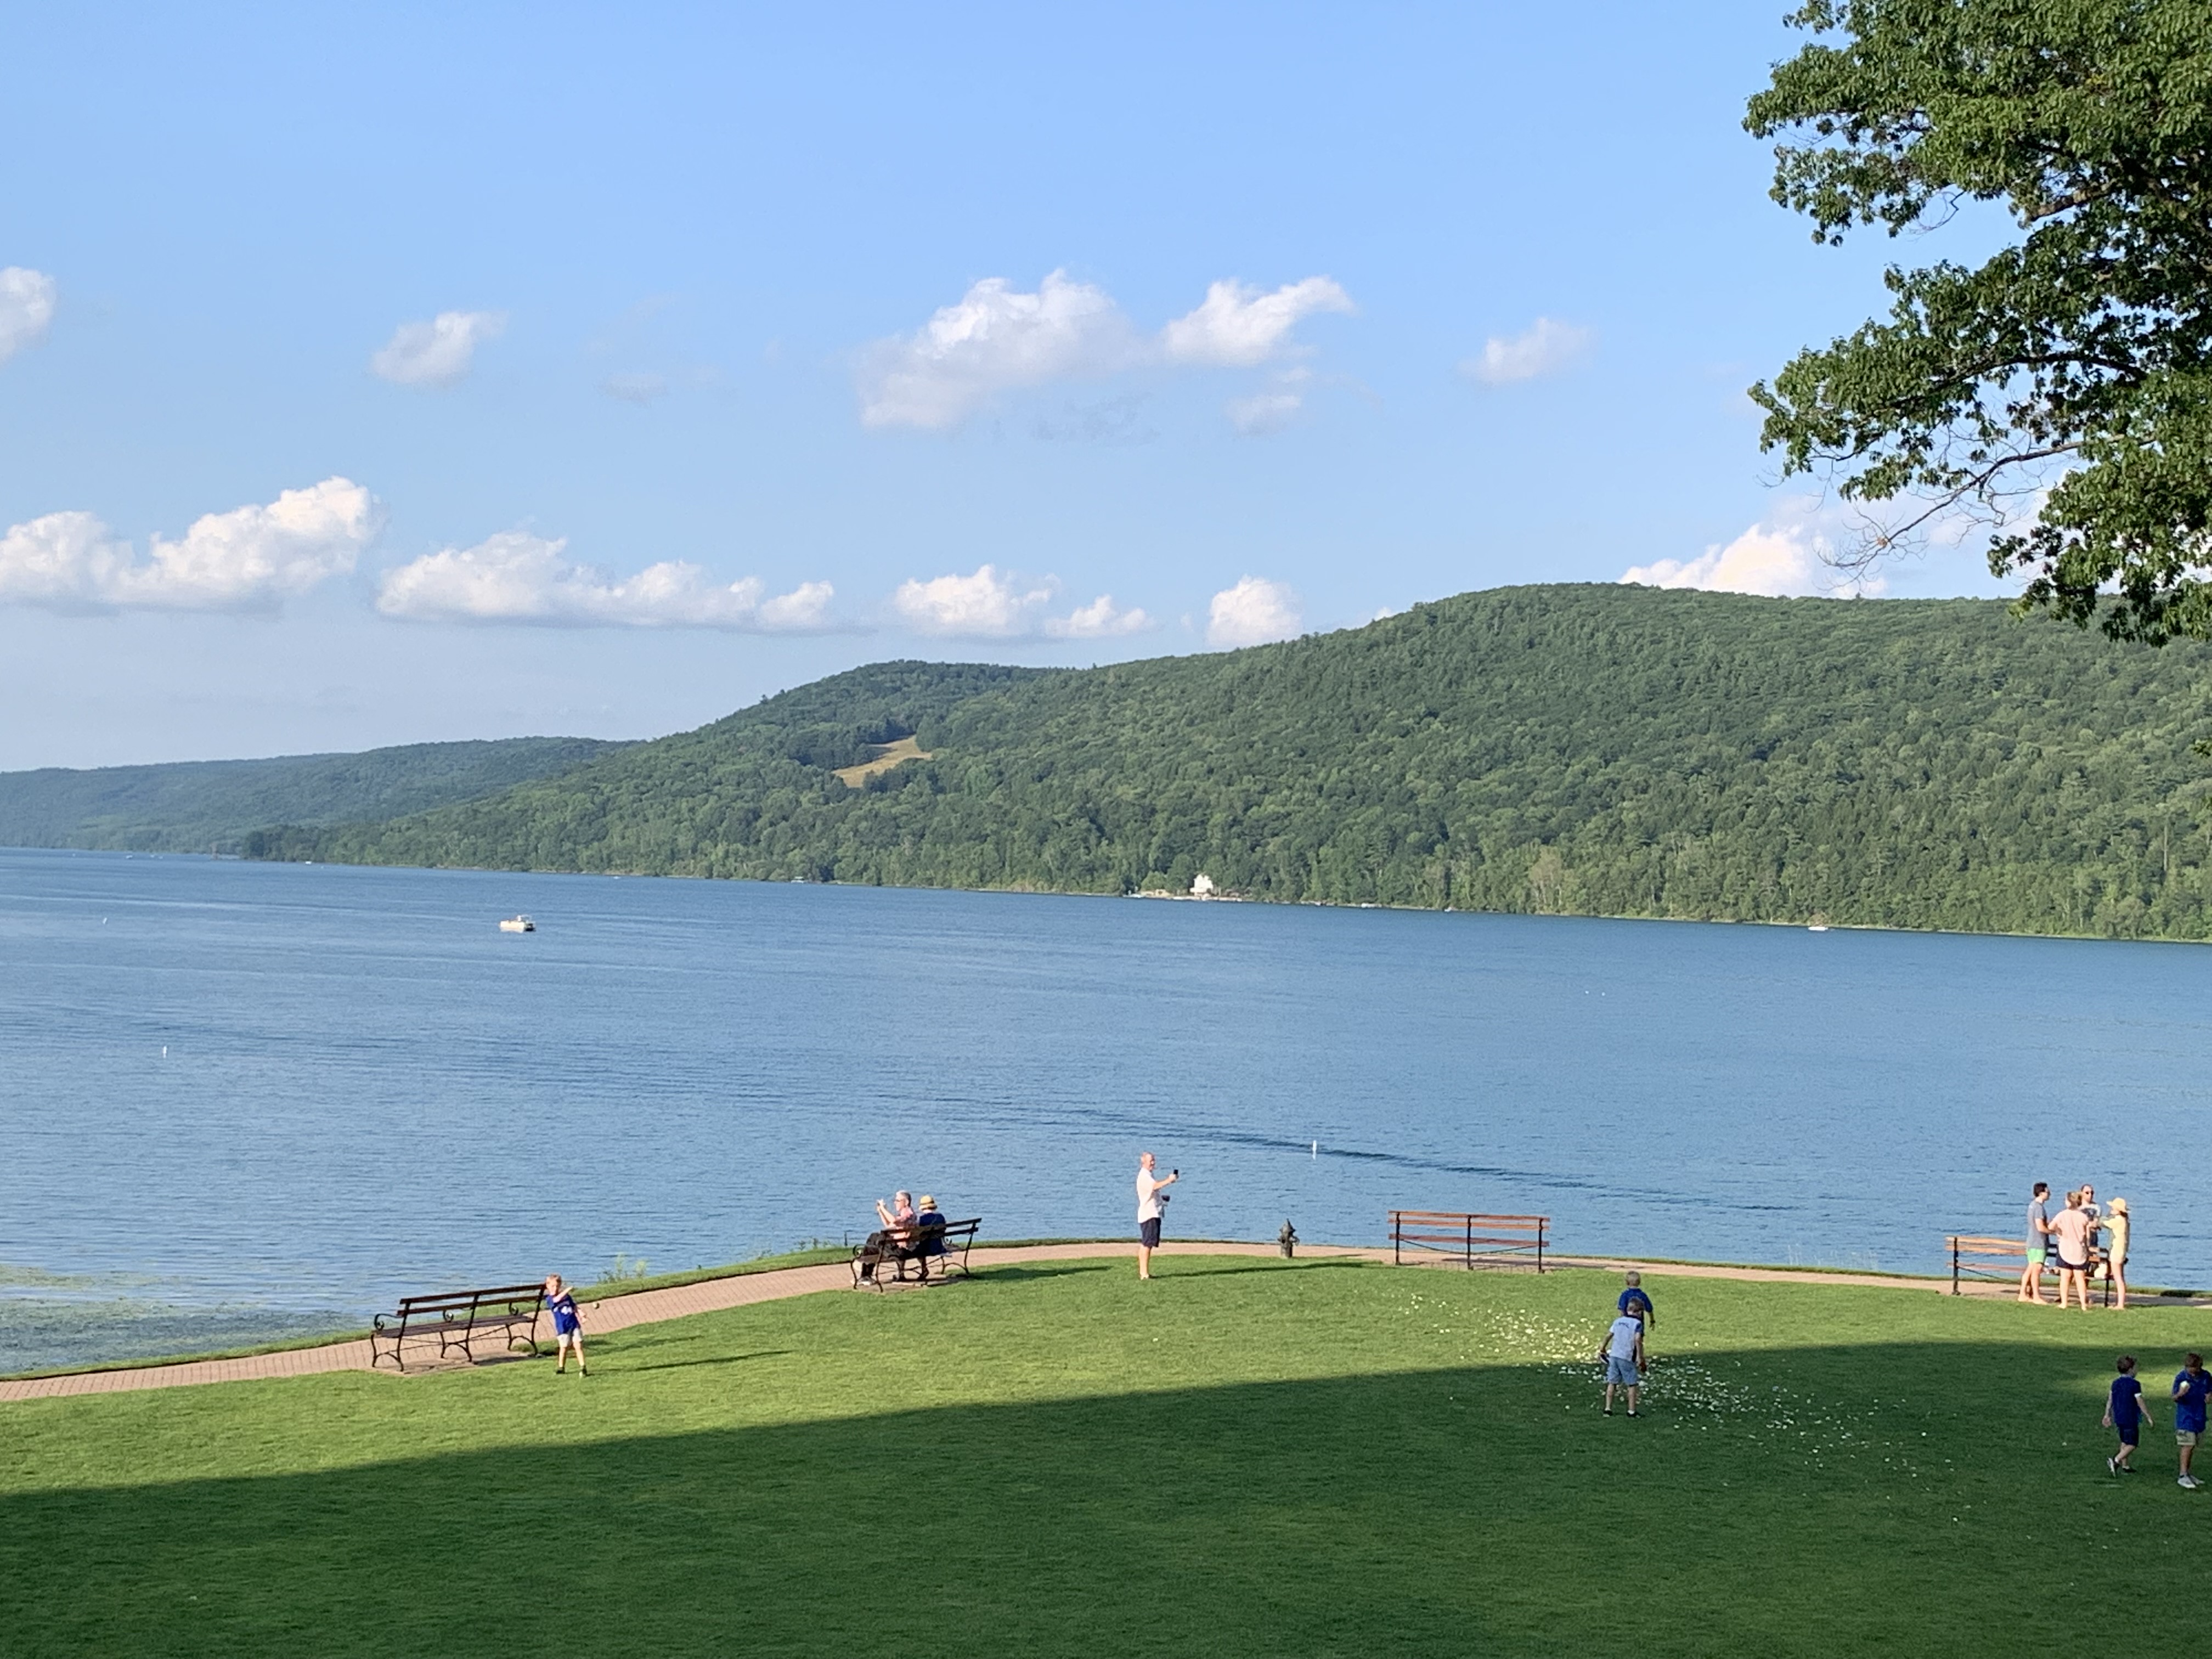 A view from the Glimmerglass opera festival 2019